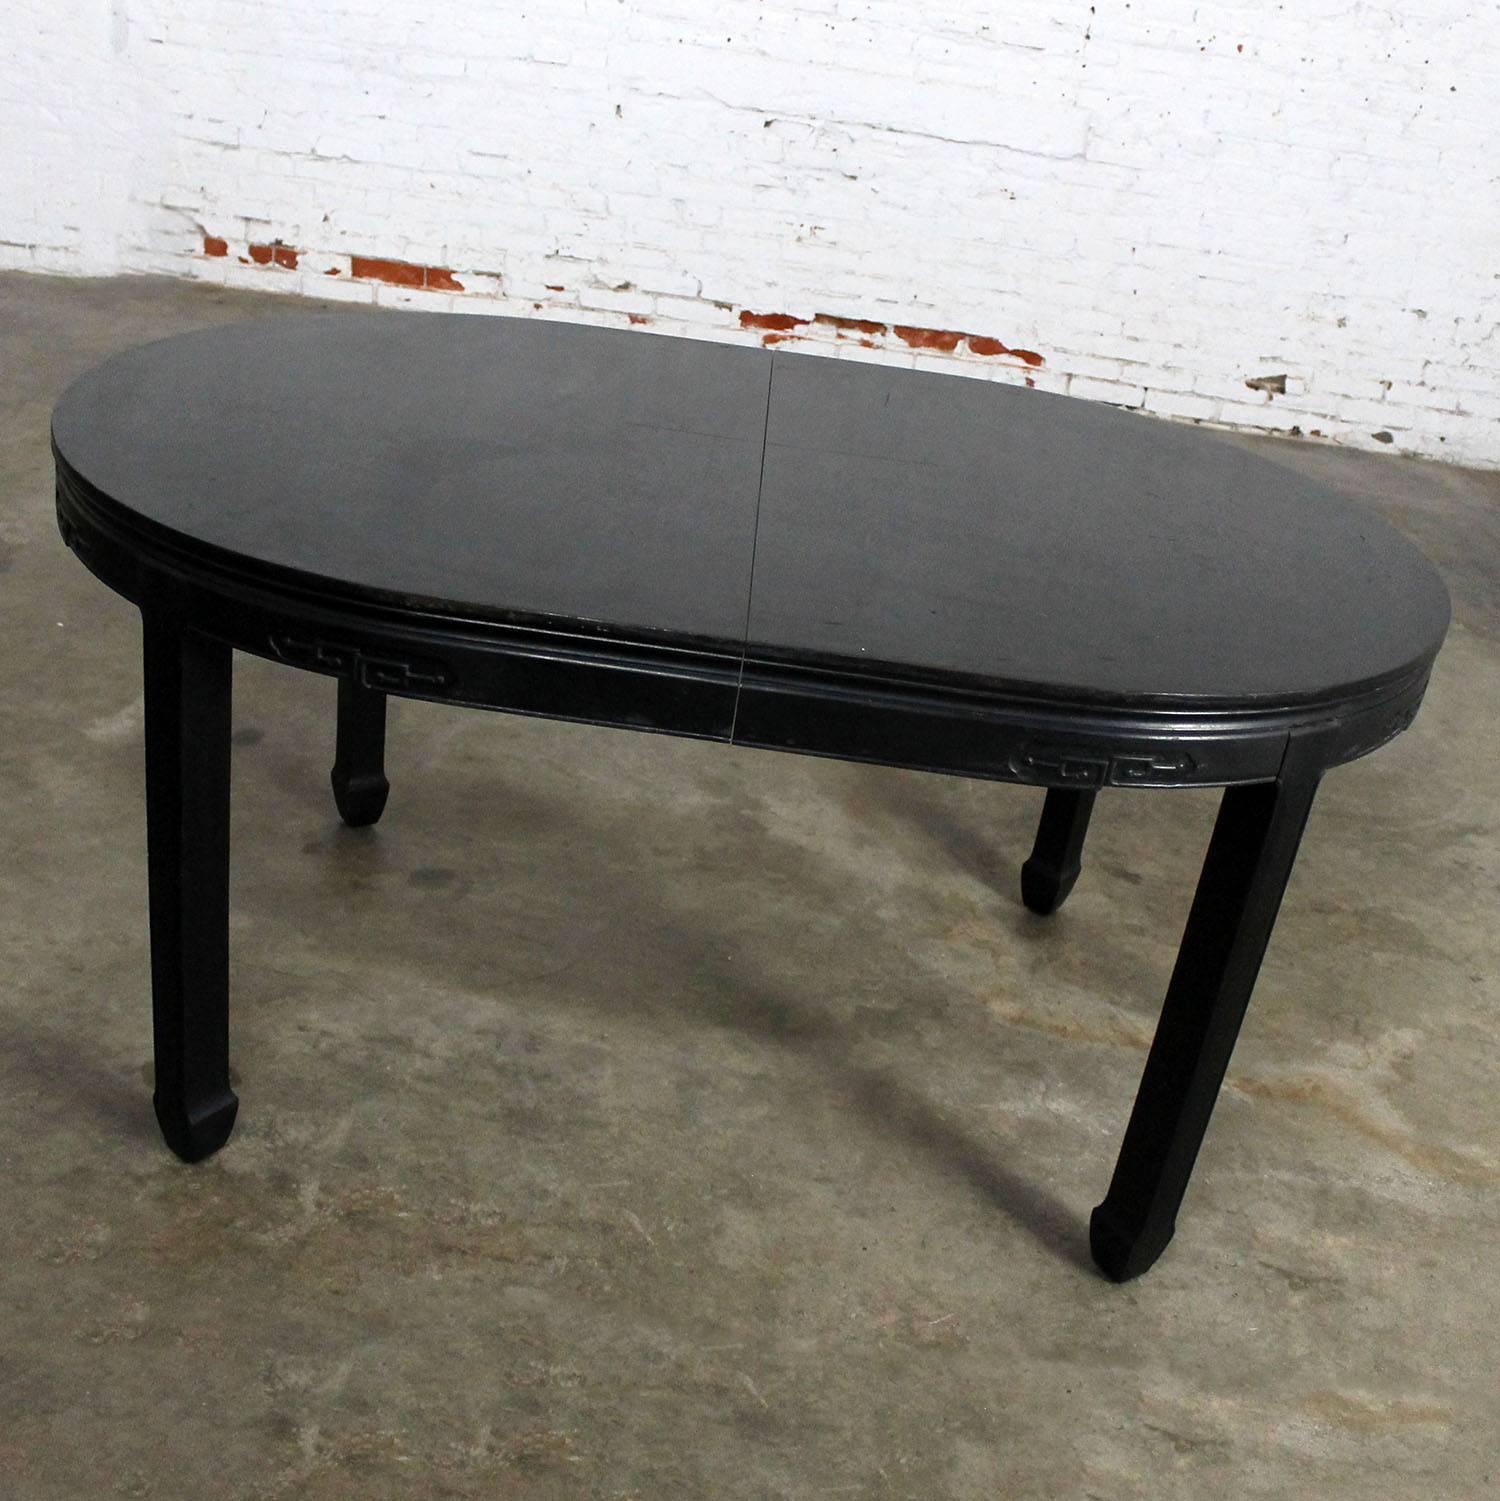 Wonderful Hollywood Regency Chin Hua style dining table attributed to Century Furniture. In a black semi-distressed finish and goes from round to oval, circa 1960.

Gorgeous Chin Hua style dining table! It has a beautiful black semi-distressed